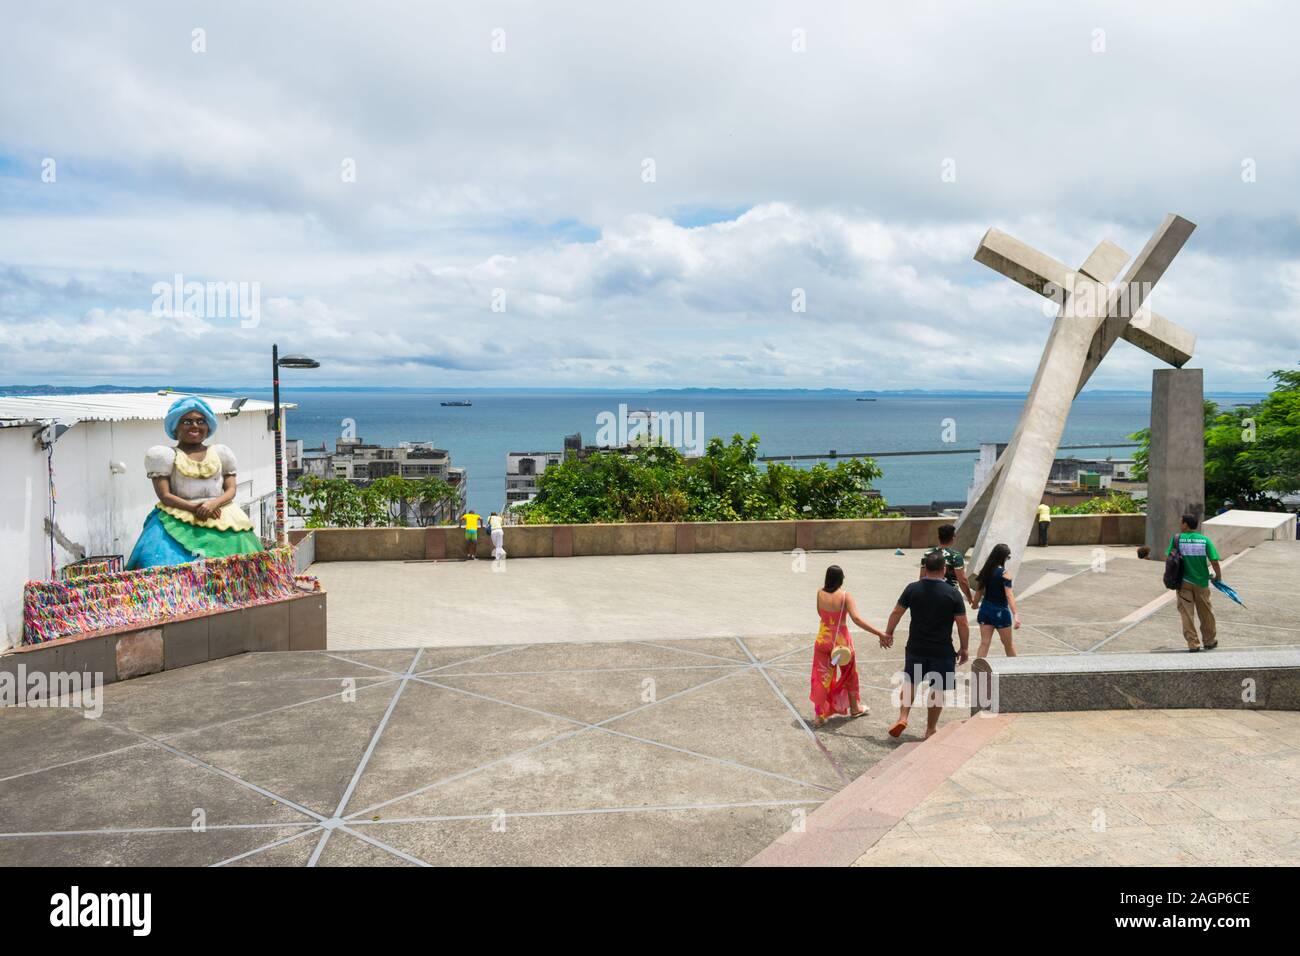 Salvador, Brazil - Circa September 2019: Statue of the Memorial of the Baianas and the fallen cross, two landmarks located at Se Square Stock Photo